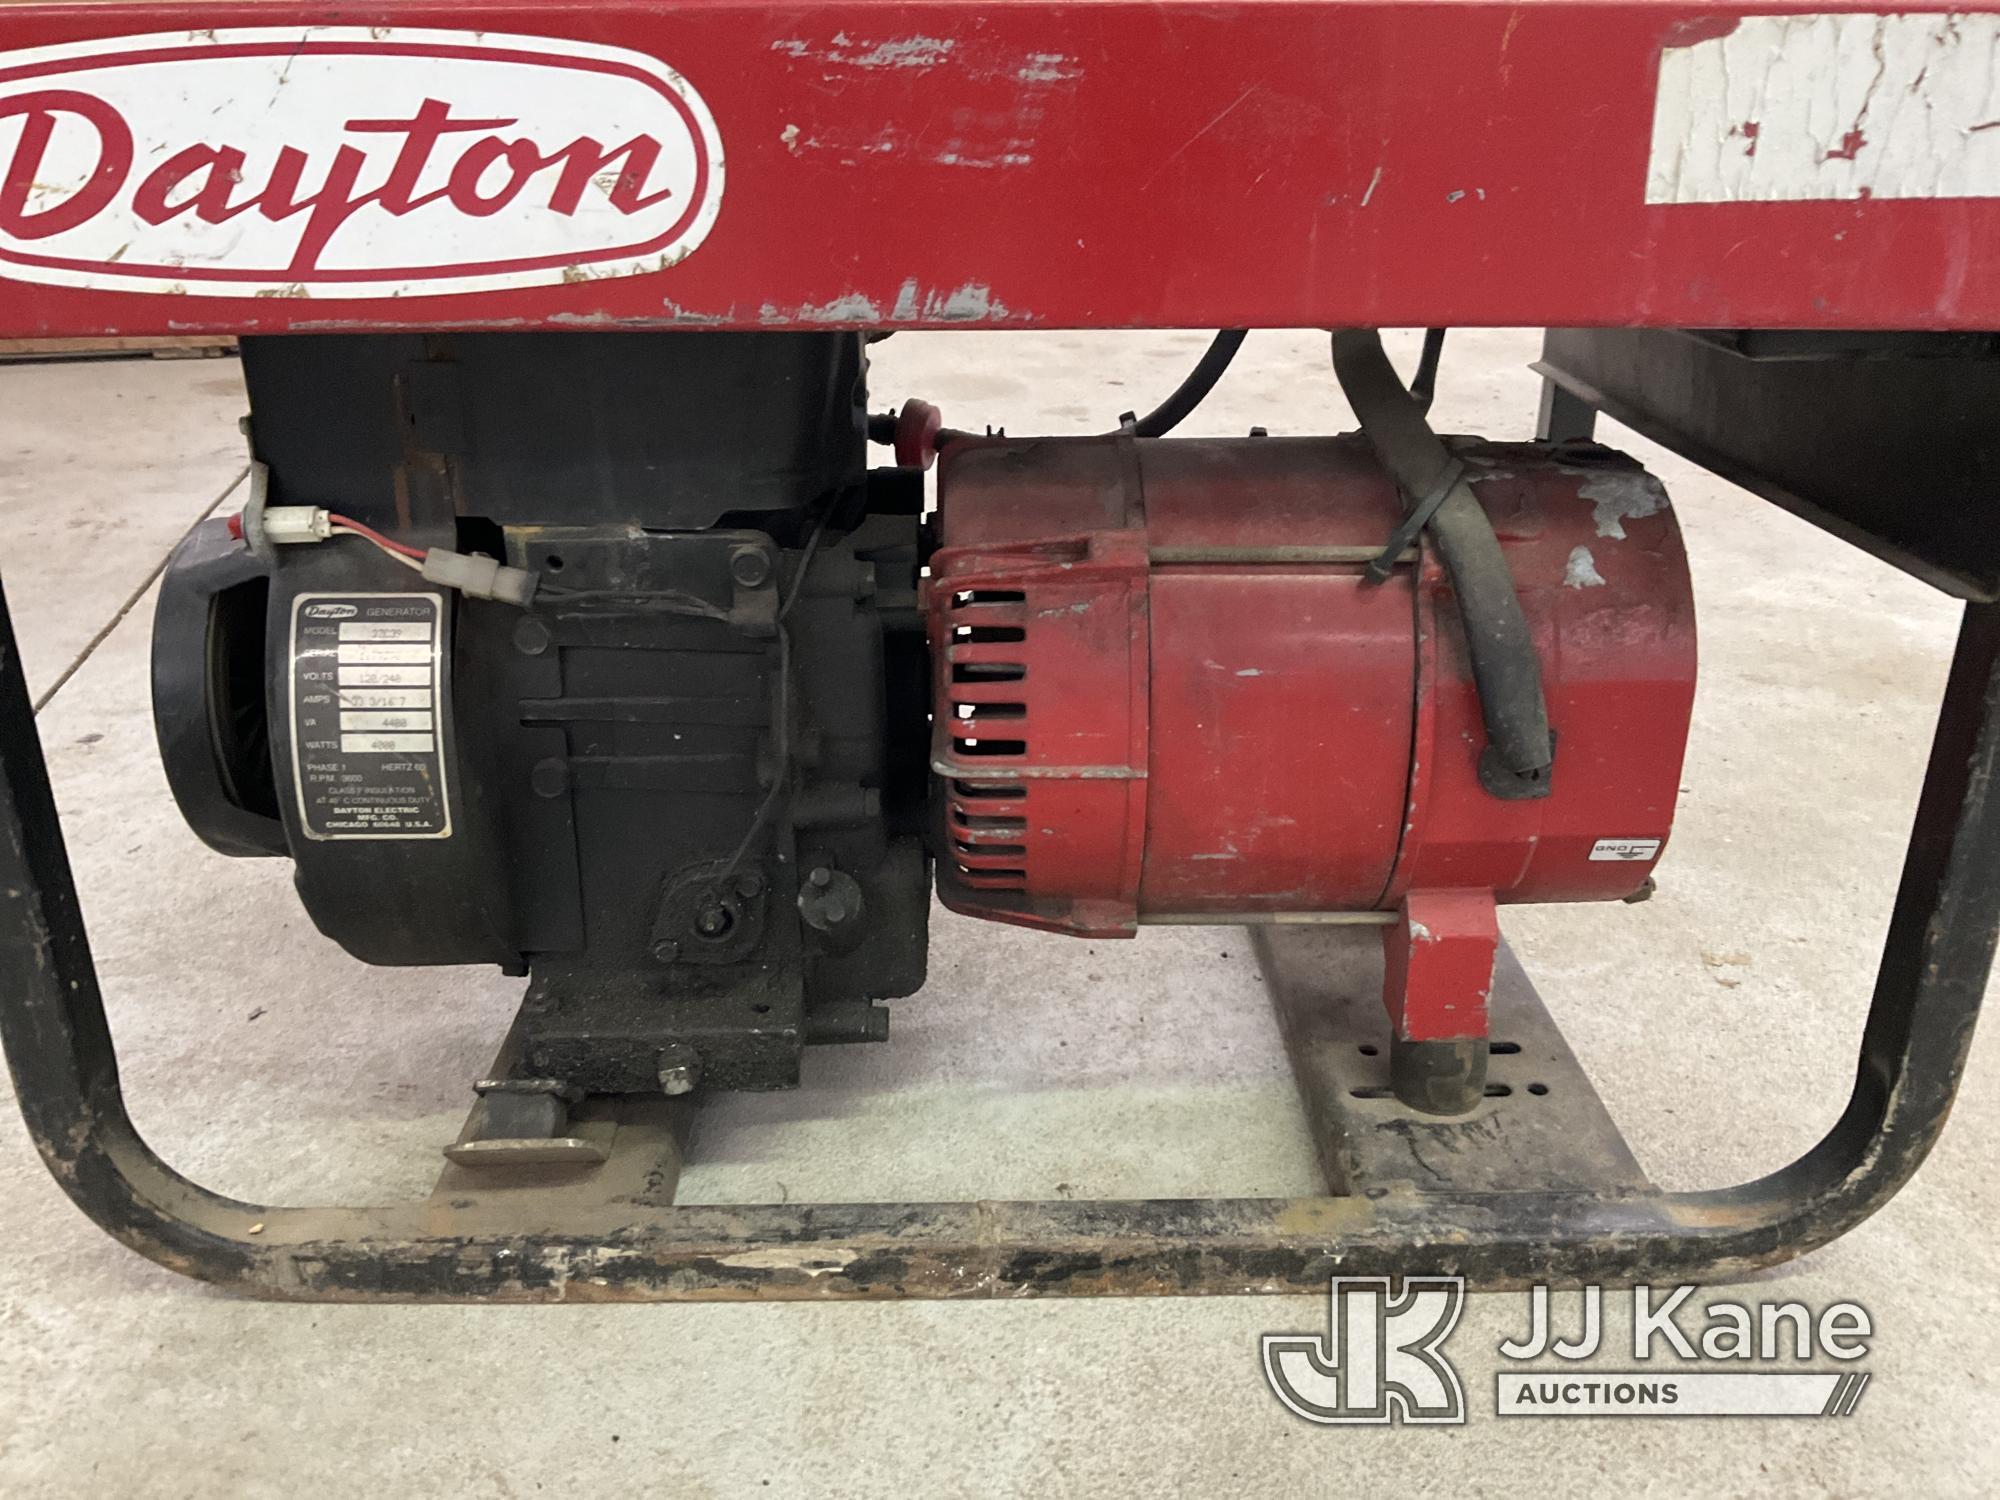 (South Beloit, IL) Dayton Portable Generator Conditions Unknown, Pull Cord Clutch Broke While Trying